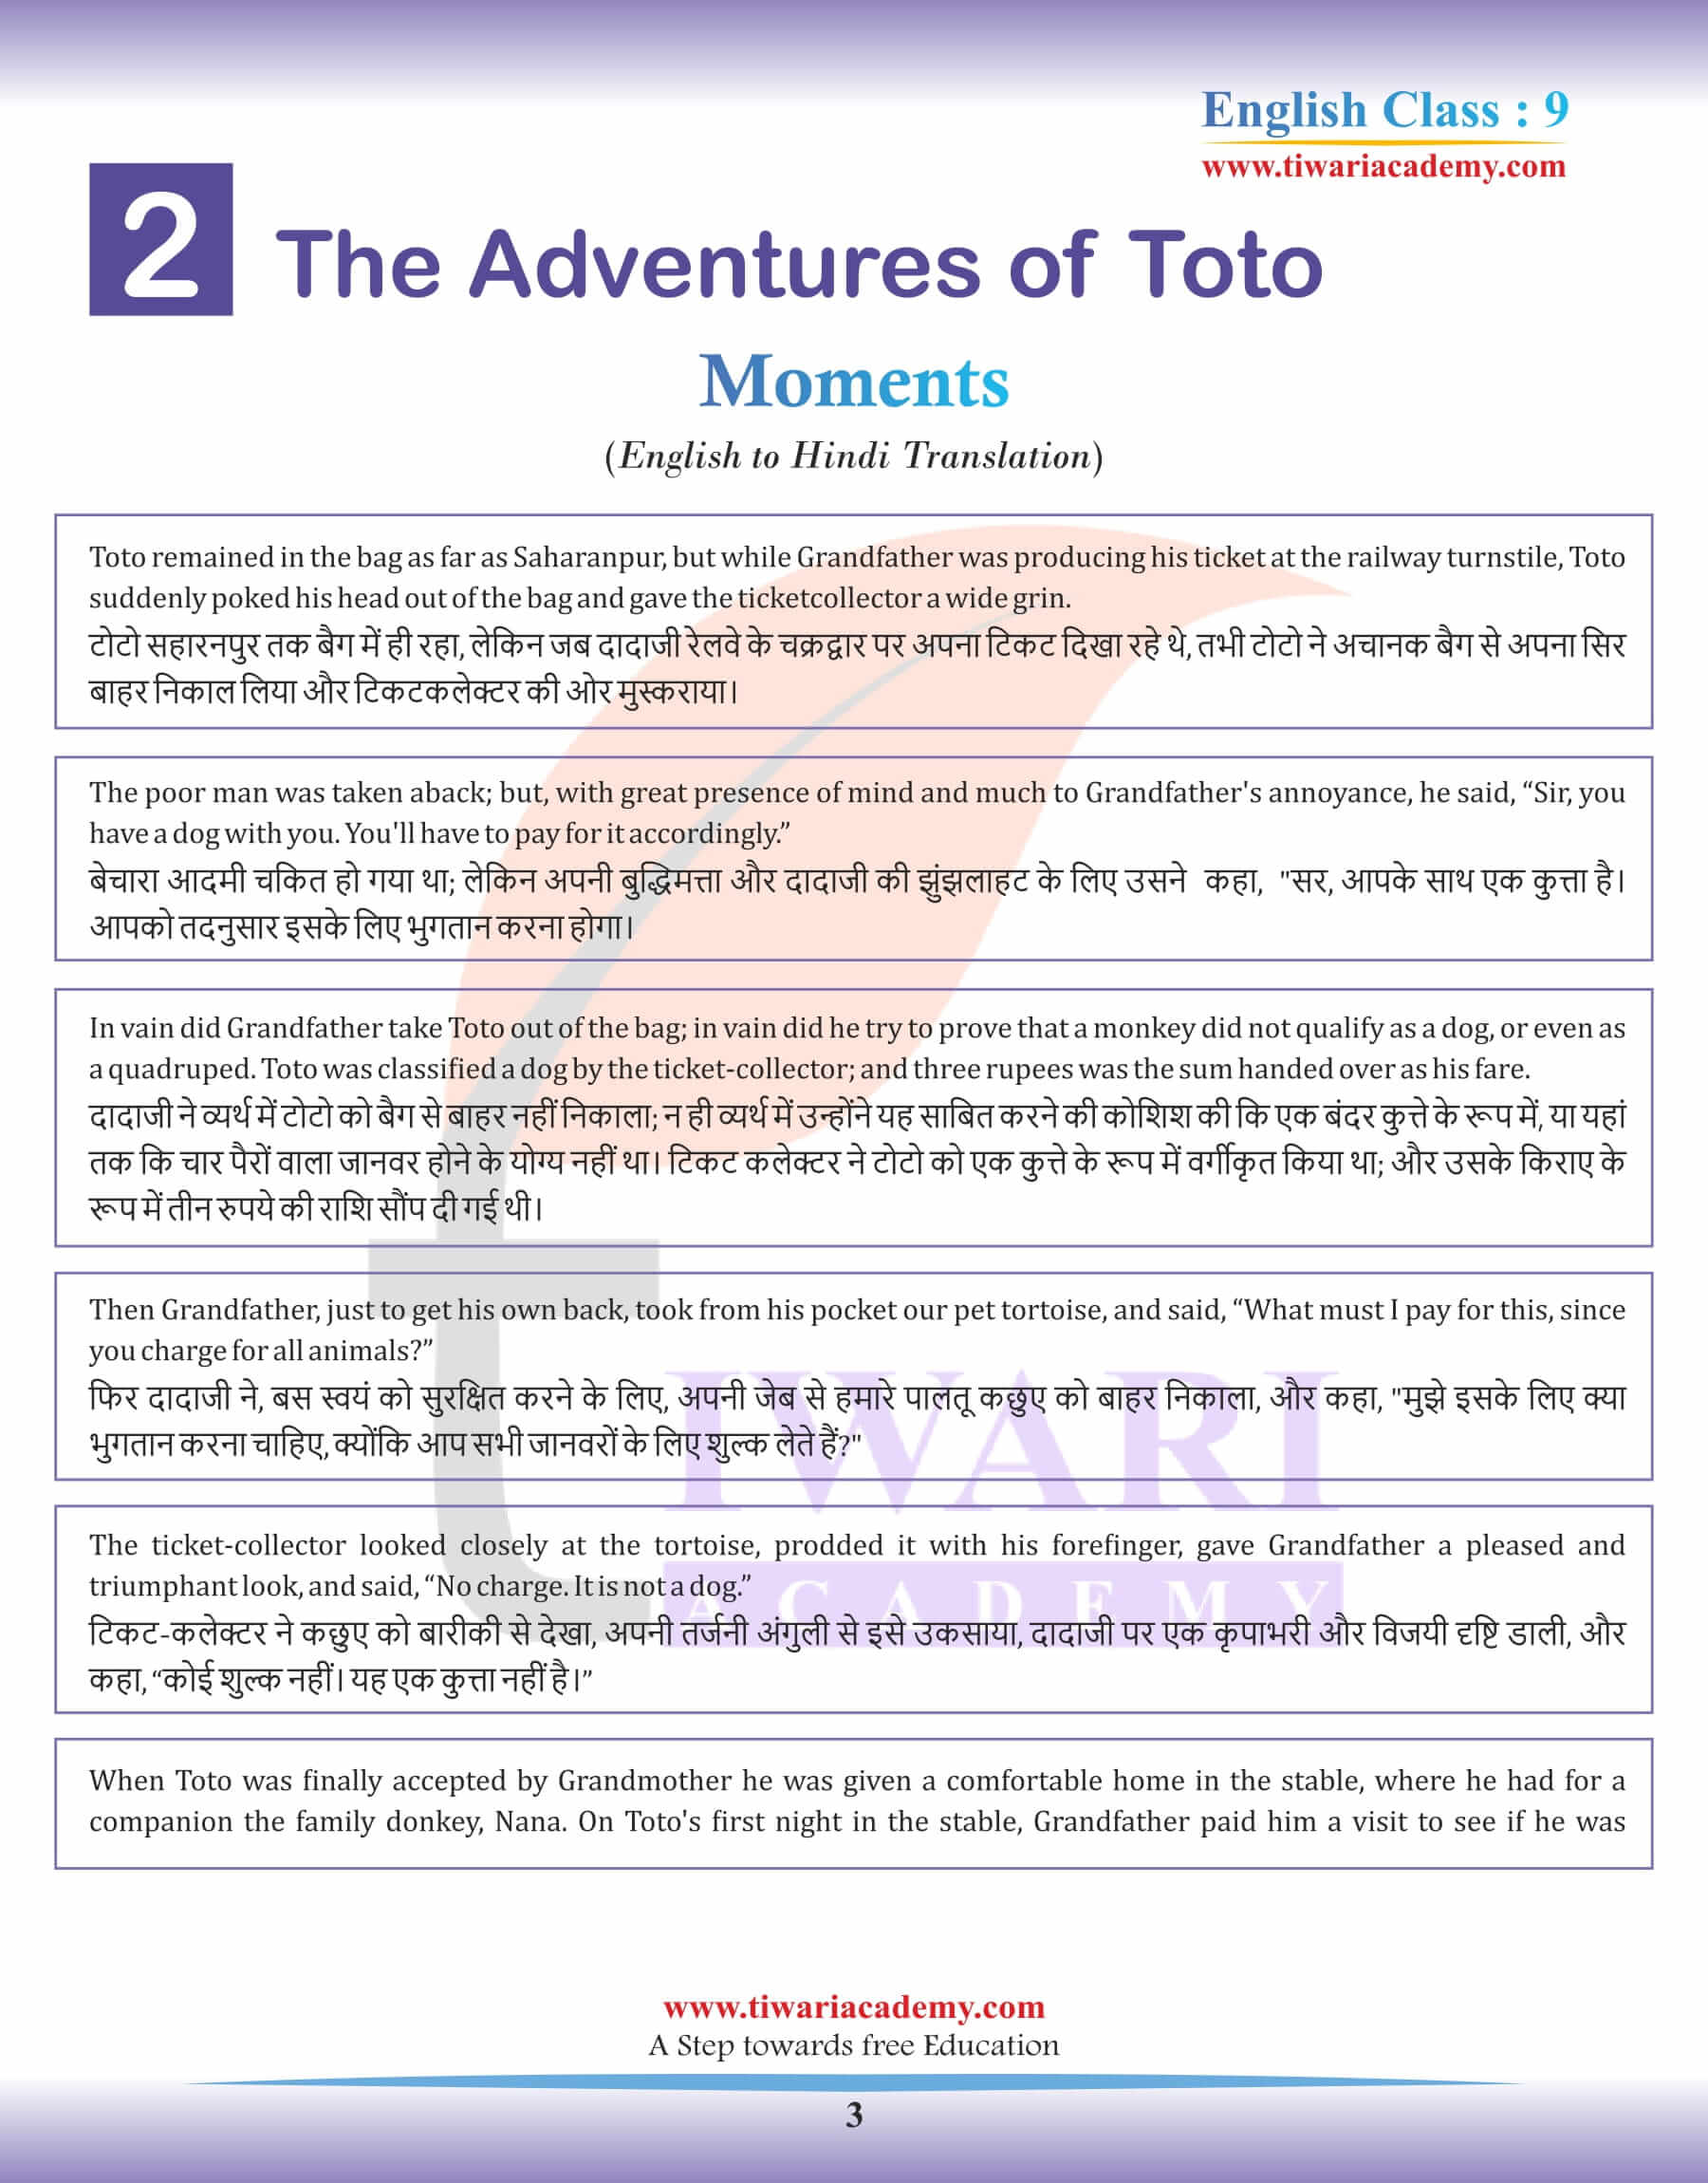 Class 9 English Moments Chapter 2 Adventure of Toto